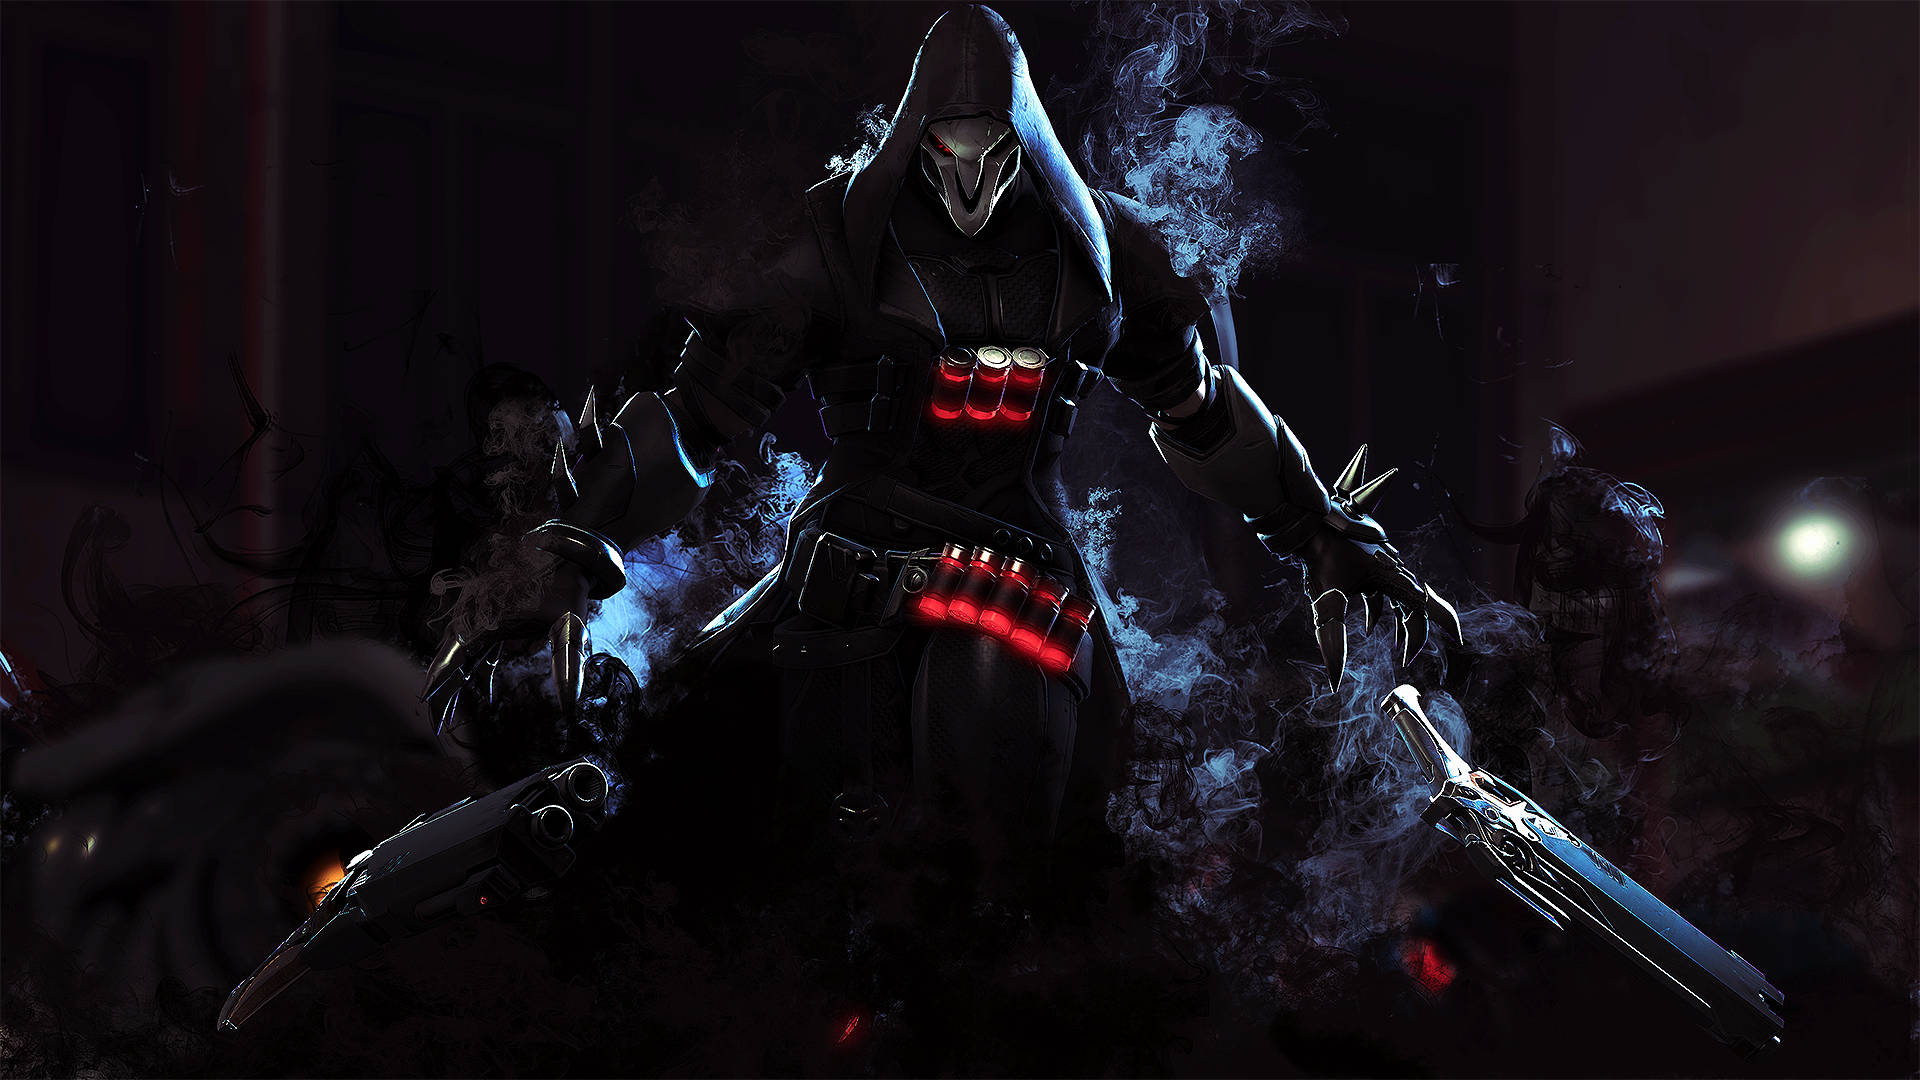 Join The Fray with Reaper, the ultimate vigilante! Wallpaper